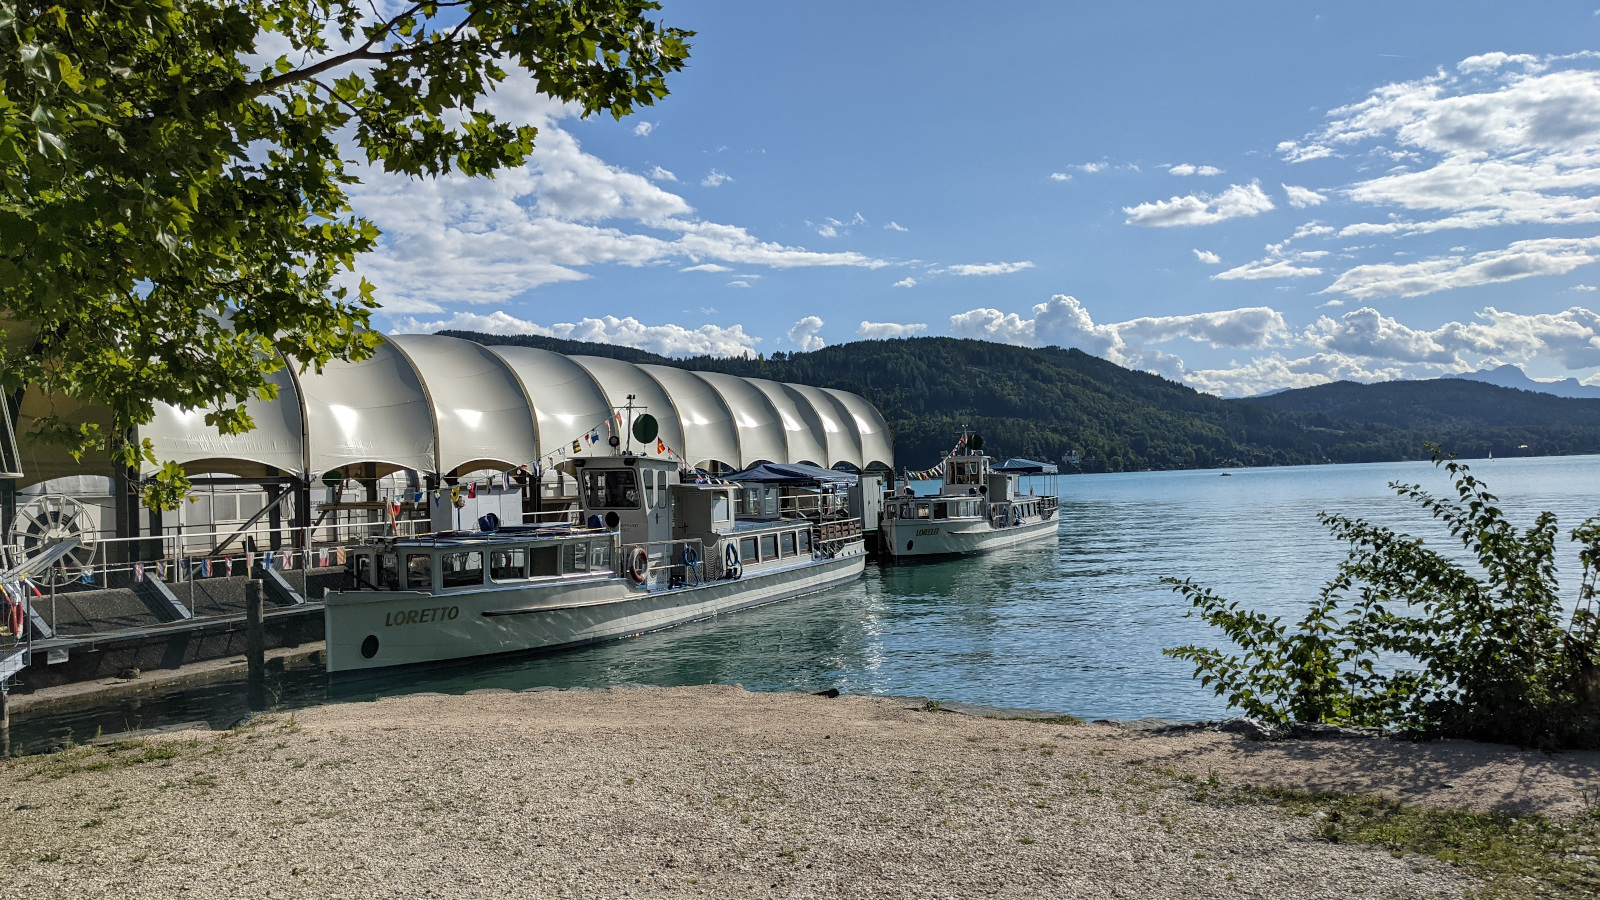 Wörthersee ships: Loretto and Lorelei